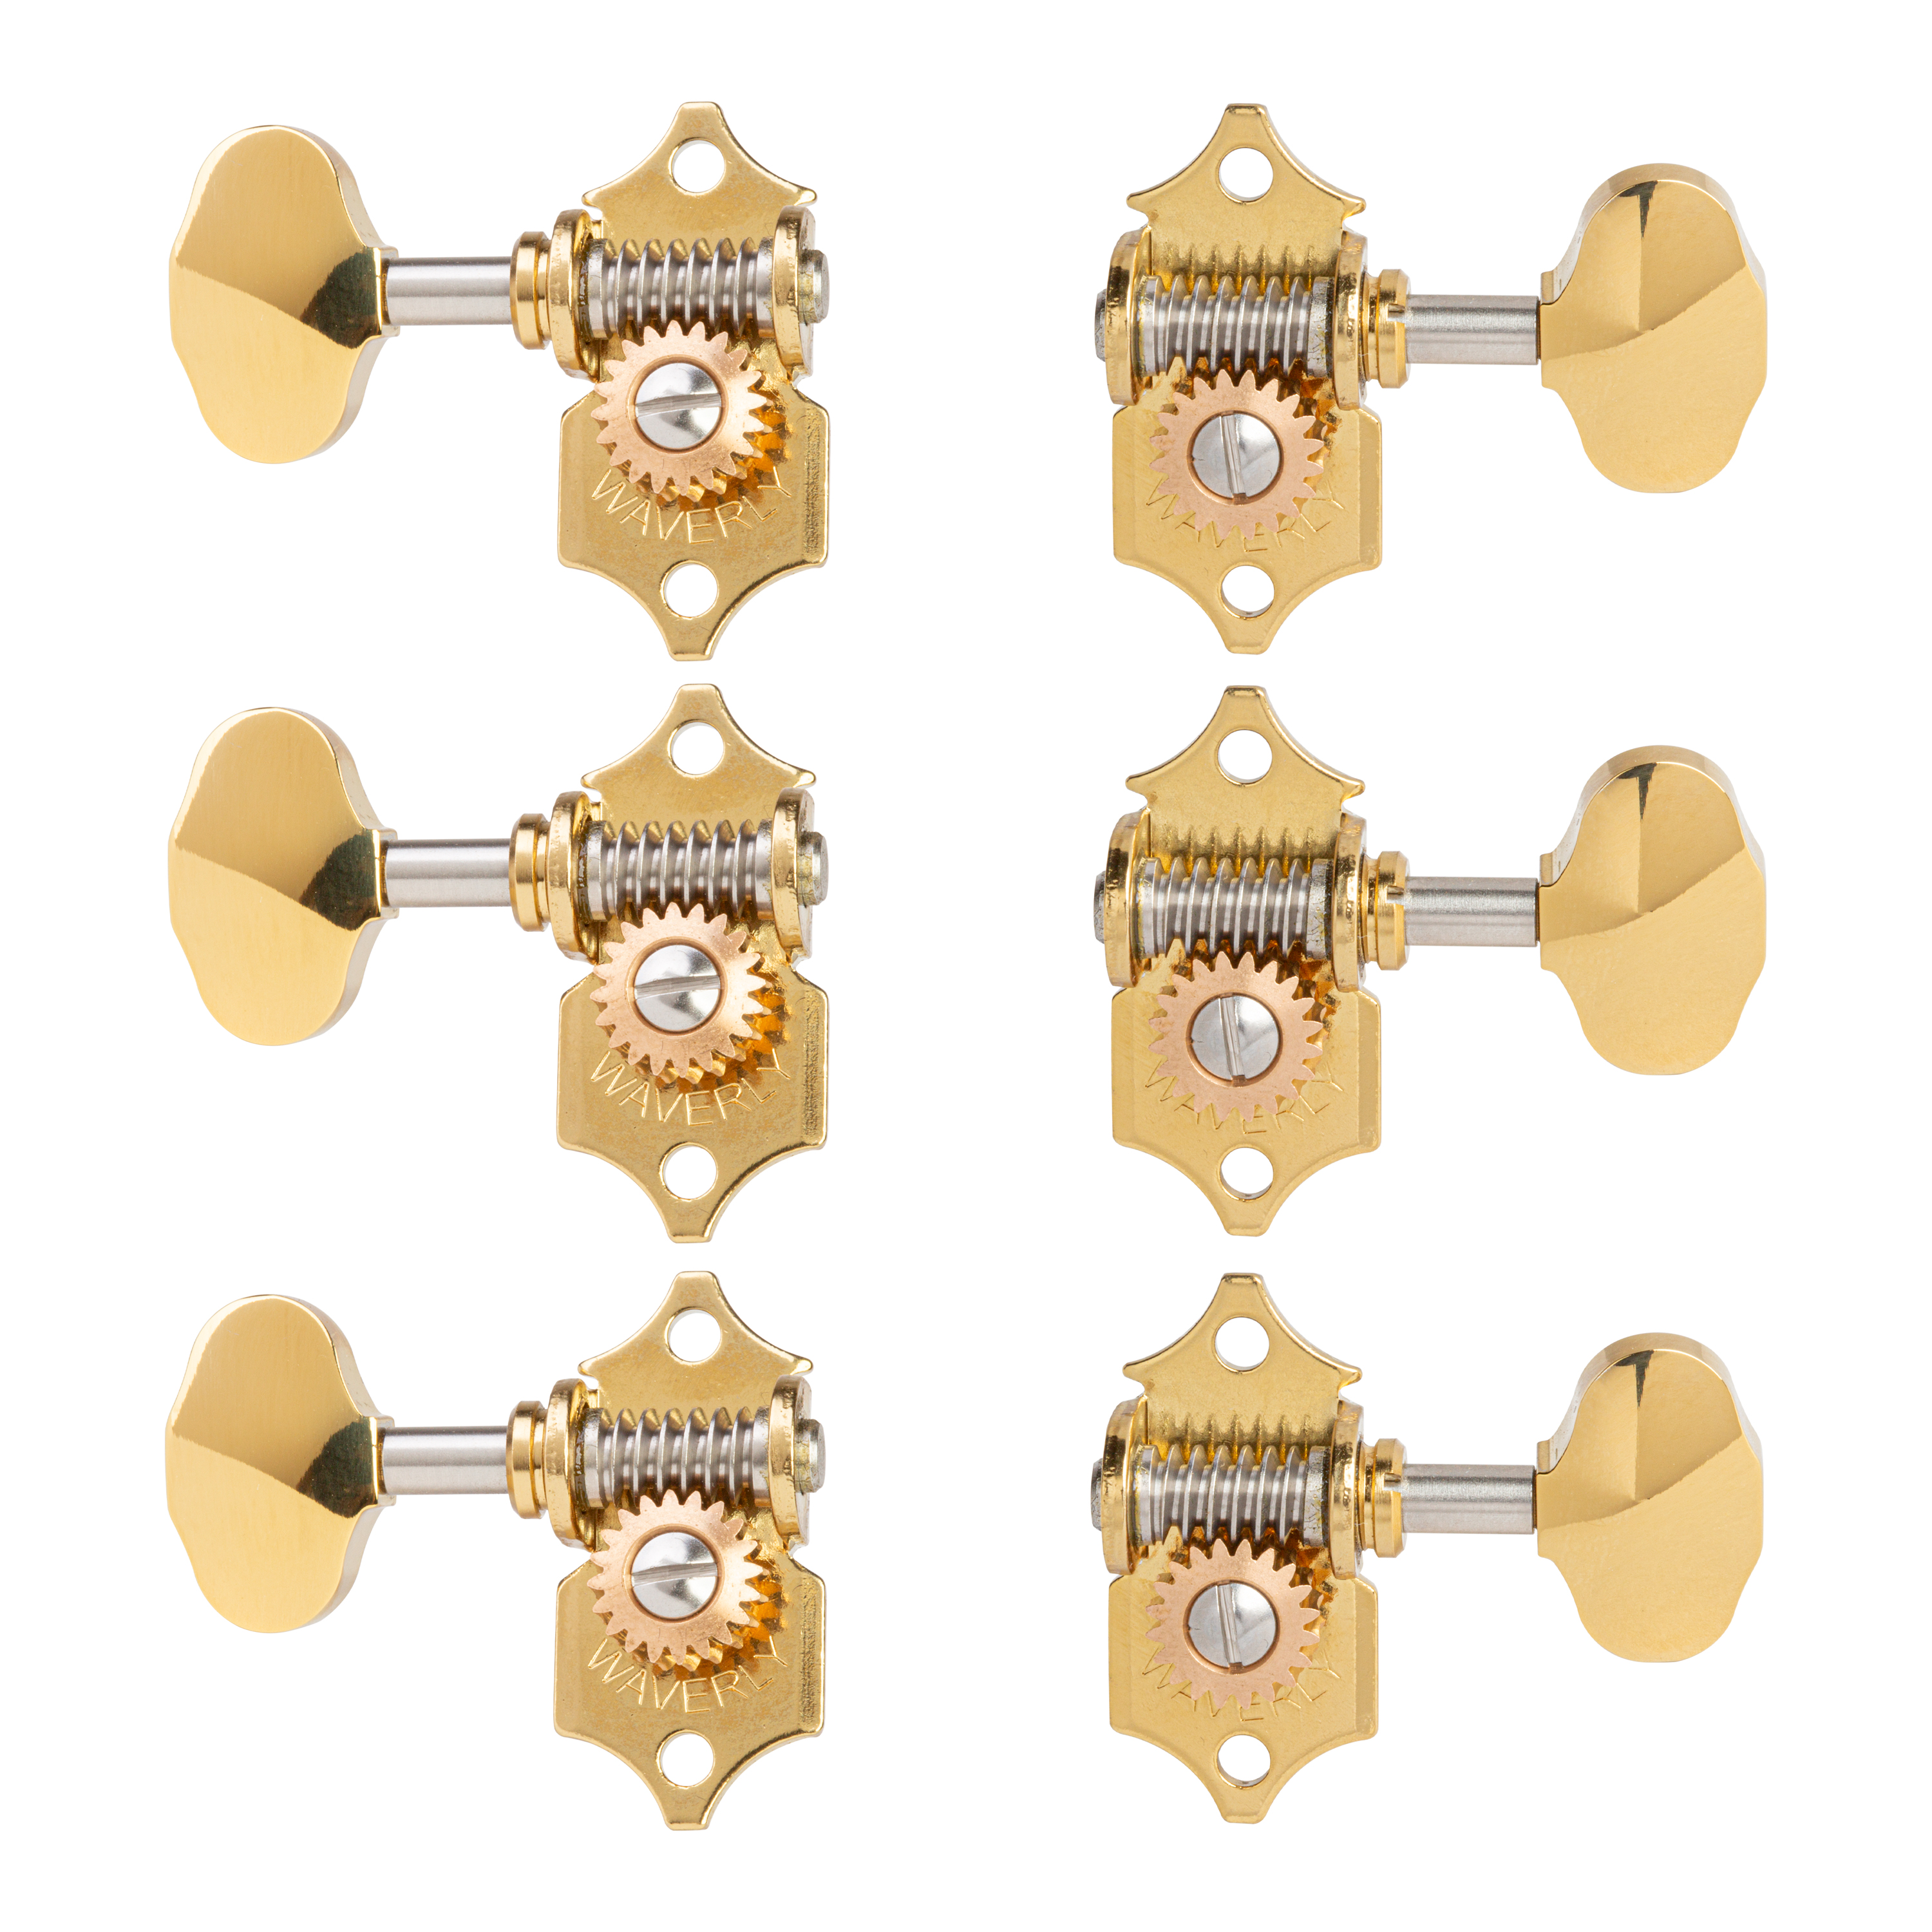 3L/3R Gold Waverly Guitar Tuners with Butterbean Knobs for Slotted Pegheads 